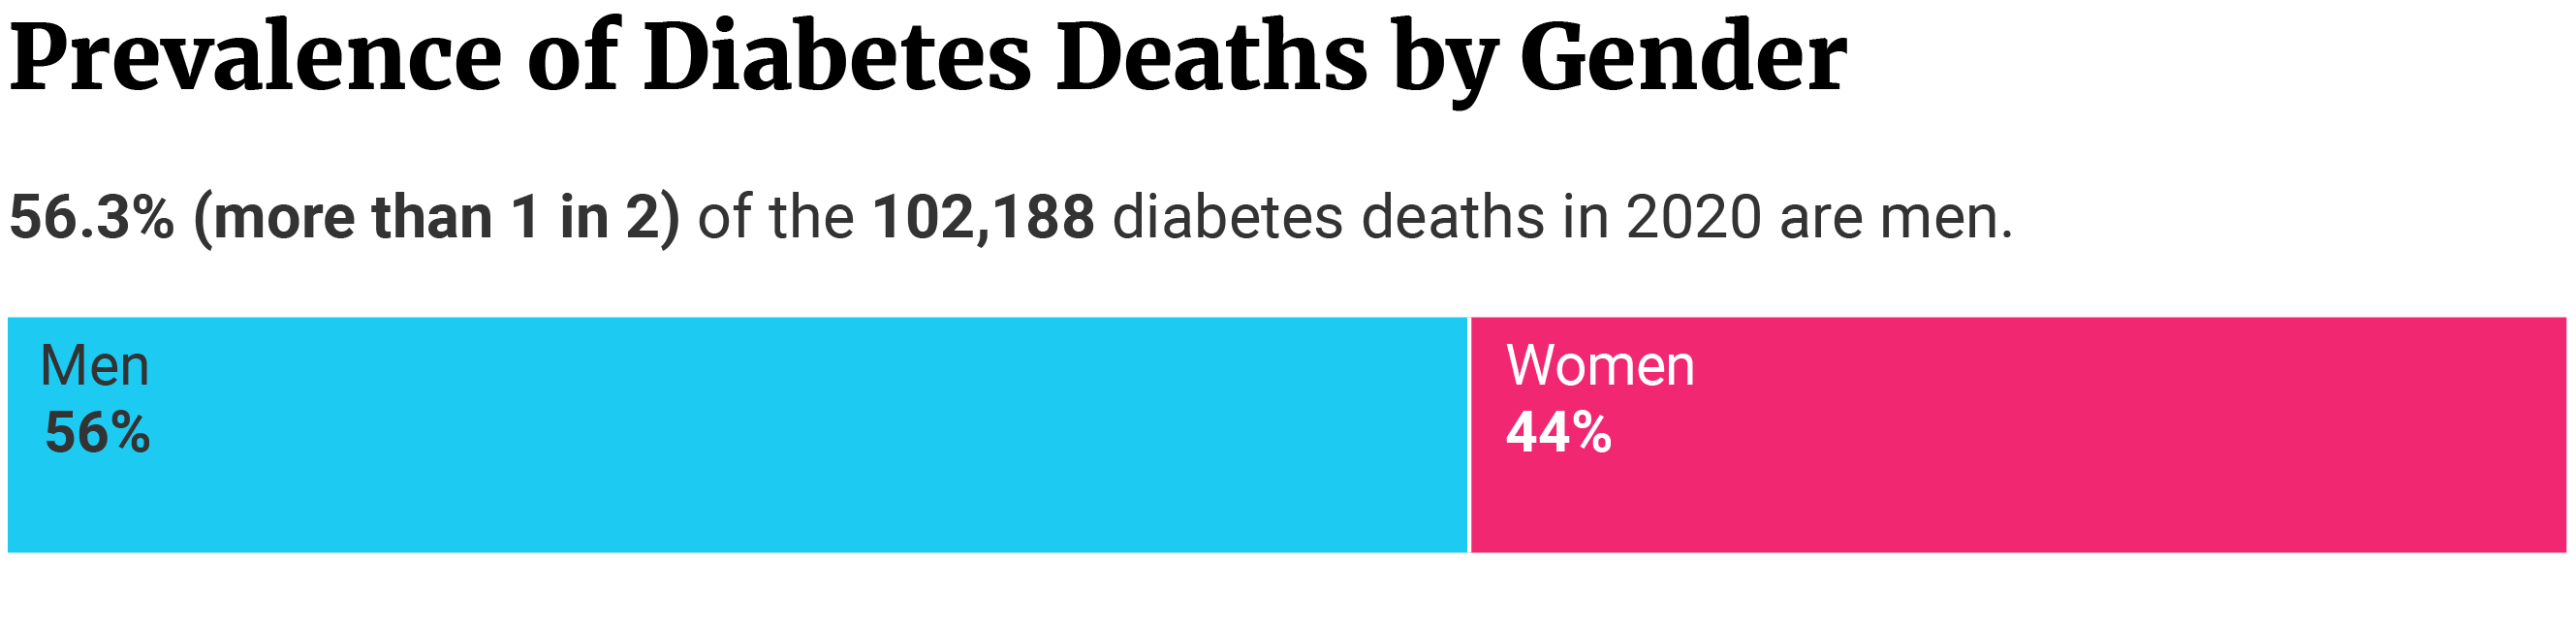 Horizontal bar showing that 56.3% (57,532) out of 102,188 diabetes deaths in 2020 are men and 43.7% (44,656) are women.